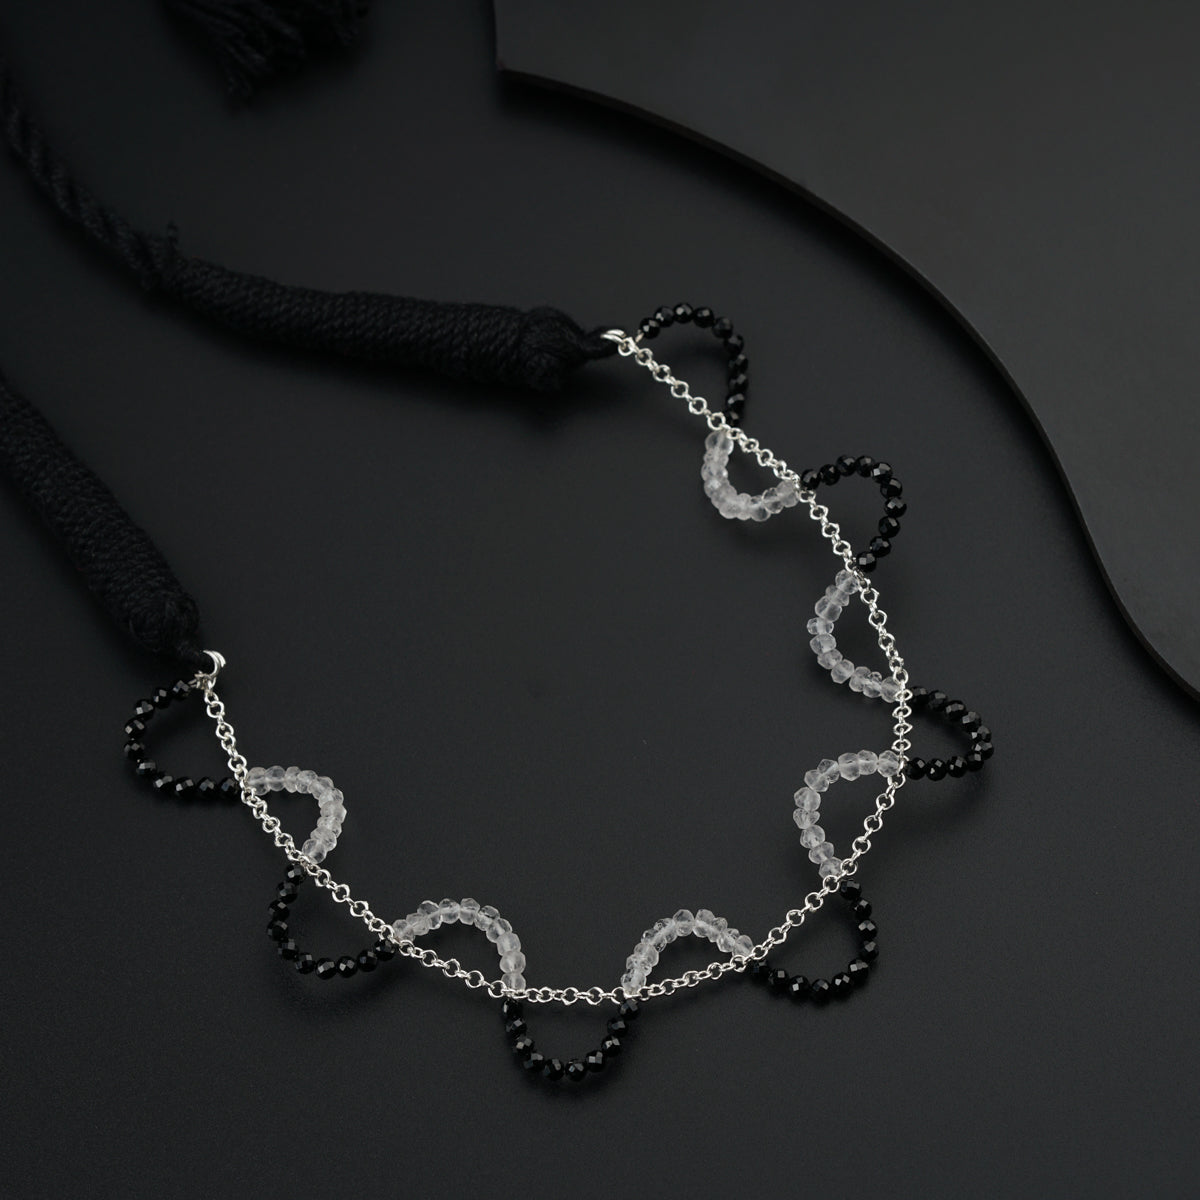 Yin Yang: Silver Necklace with Black spinel and Crystals